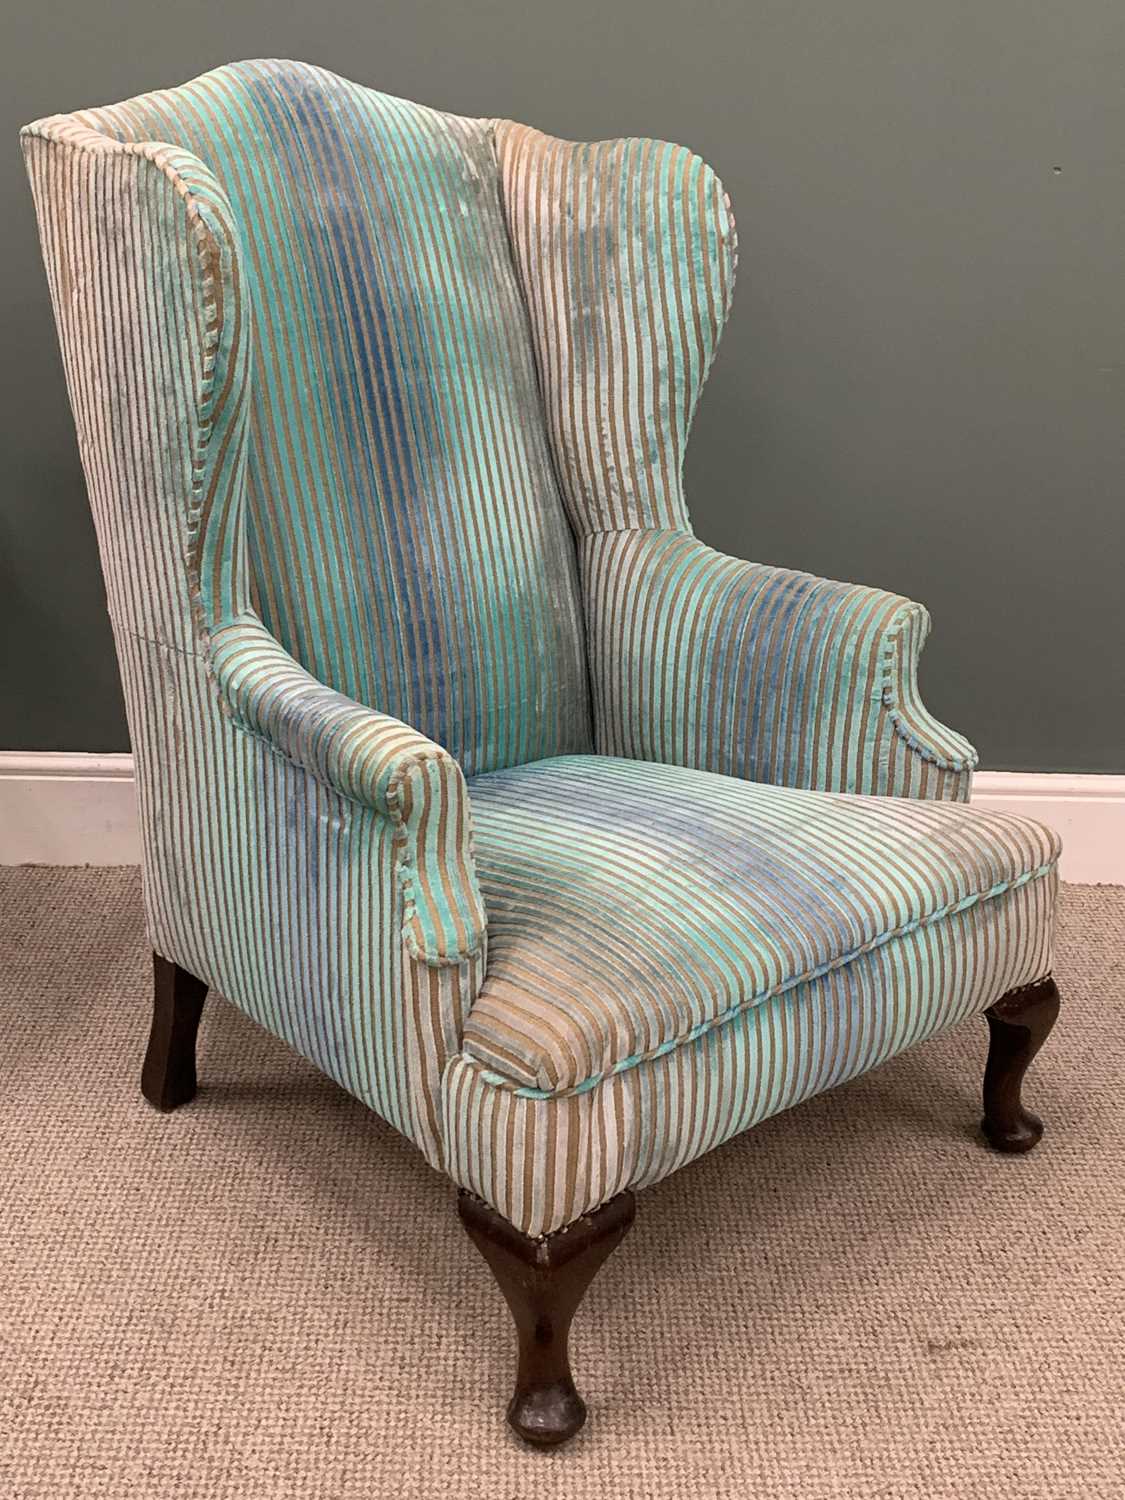 VINTAGE RE-UPHOLSTERED WINGBACK ARMCHAIR, blue striped chenille, oversized seat, Queen Anne front - Image 3 of 4